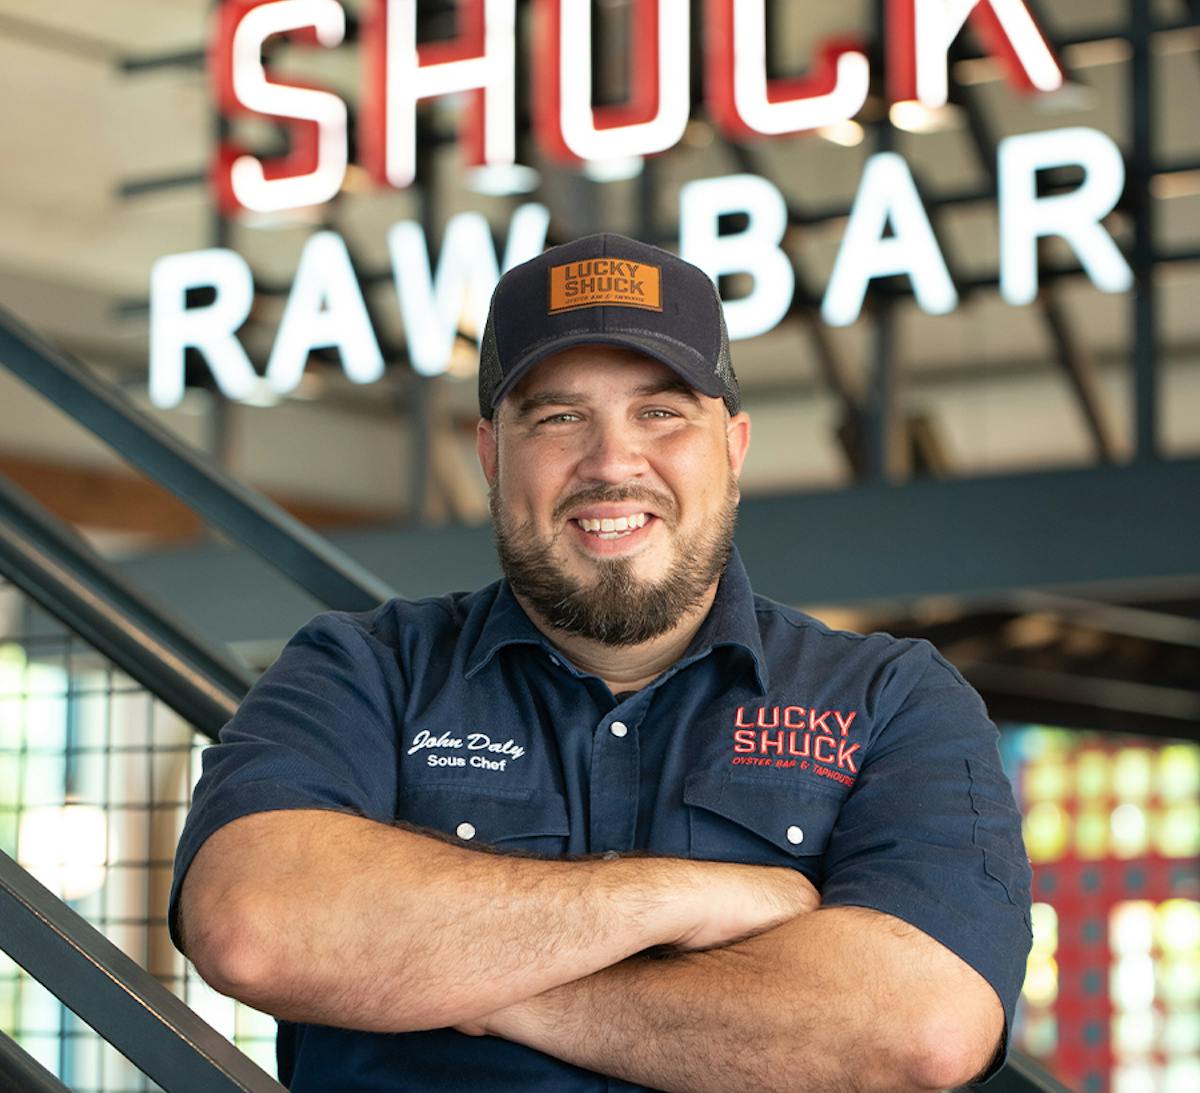 executive chef standing in front of a raw bar